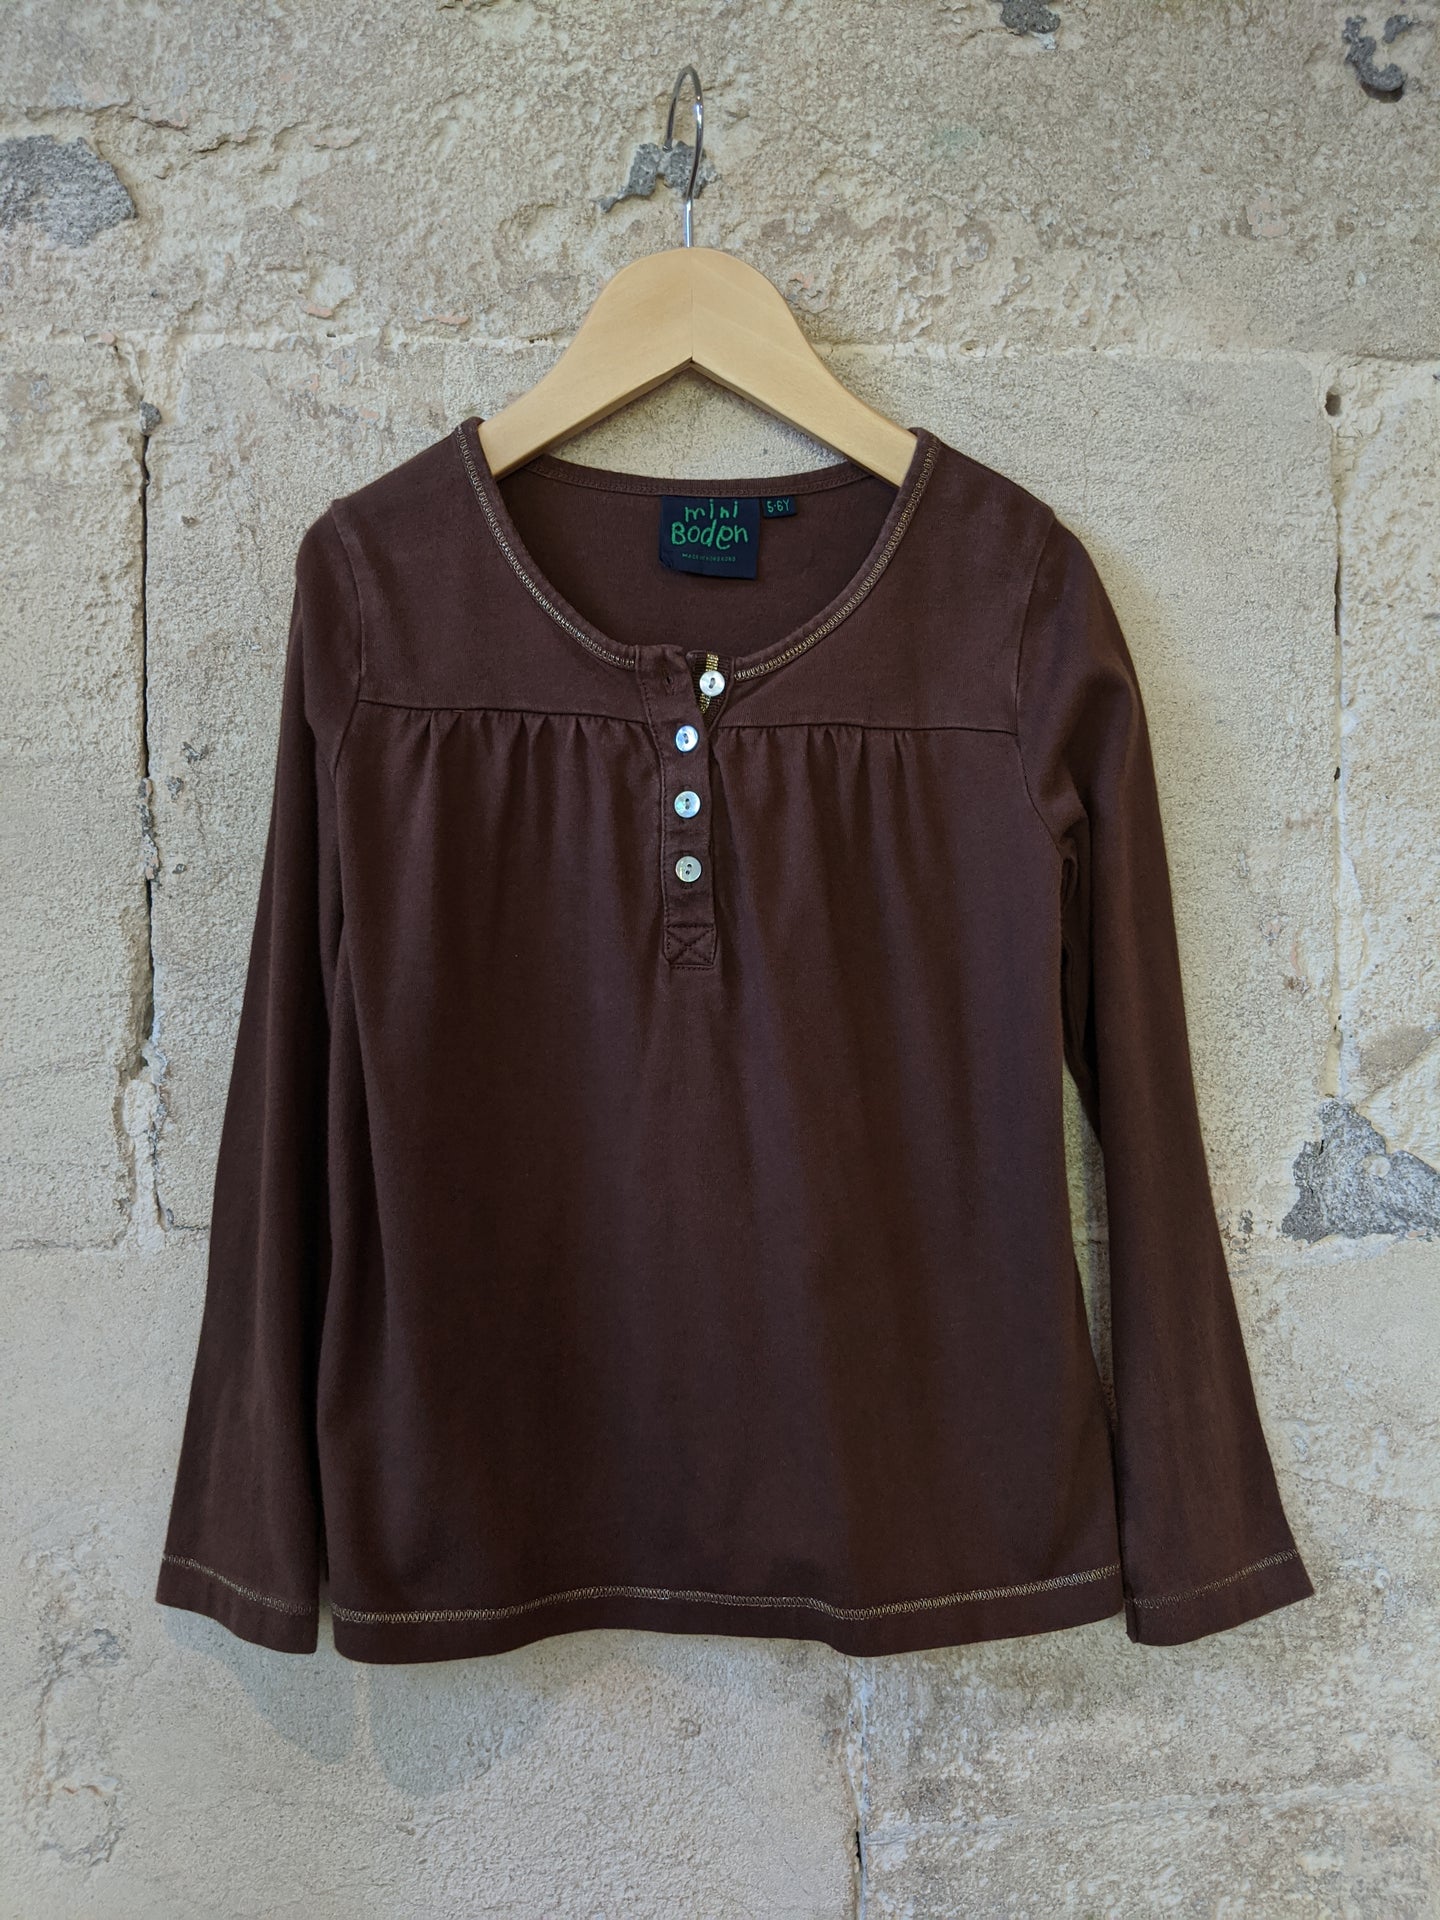 Great Chocolate Brown Soft Cotton Sparkly Top - 6 Years